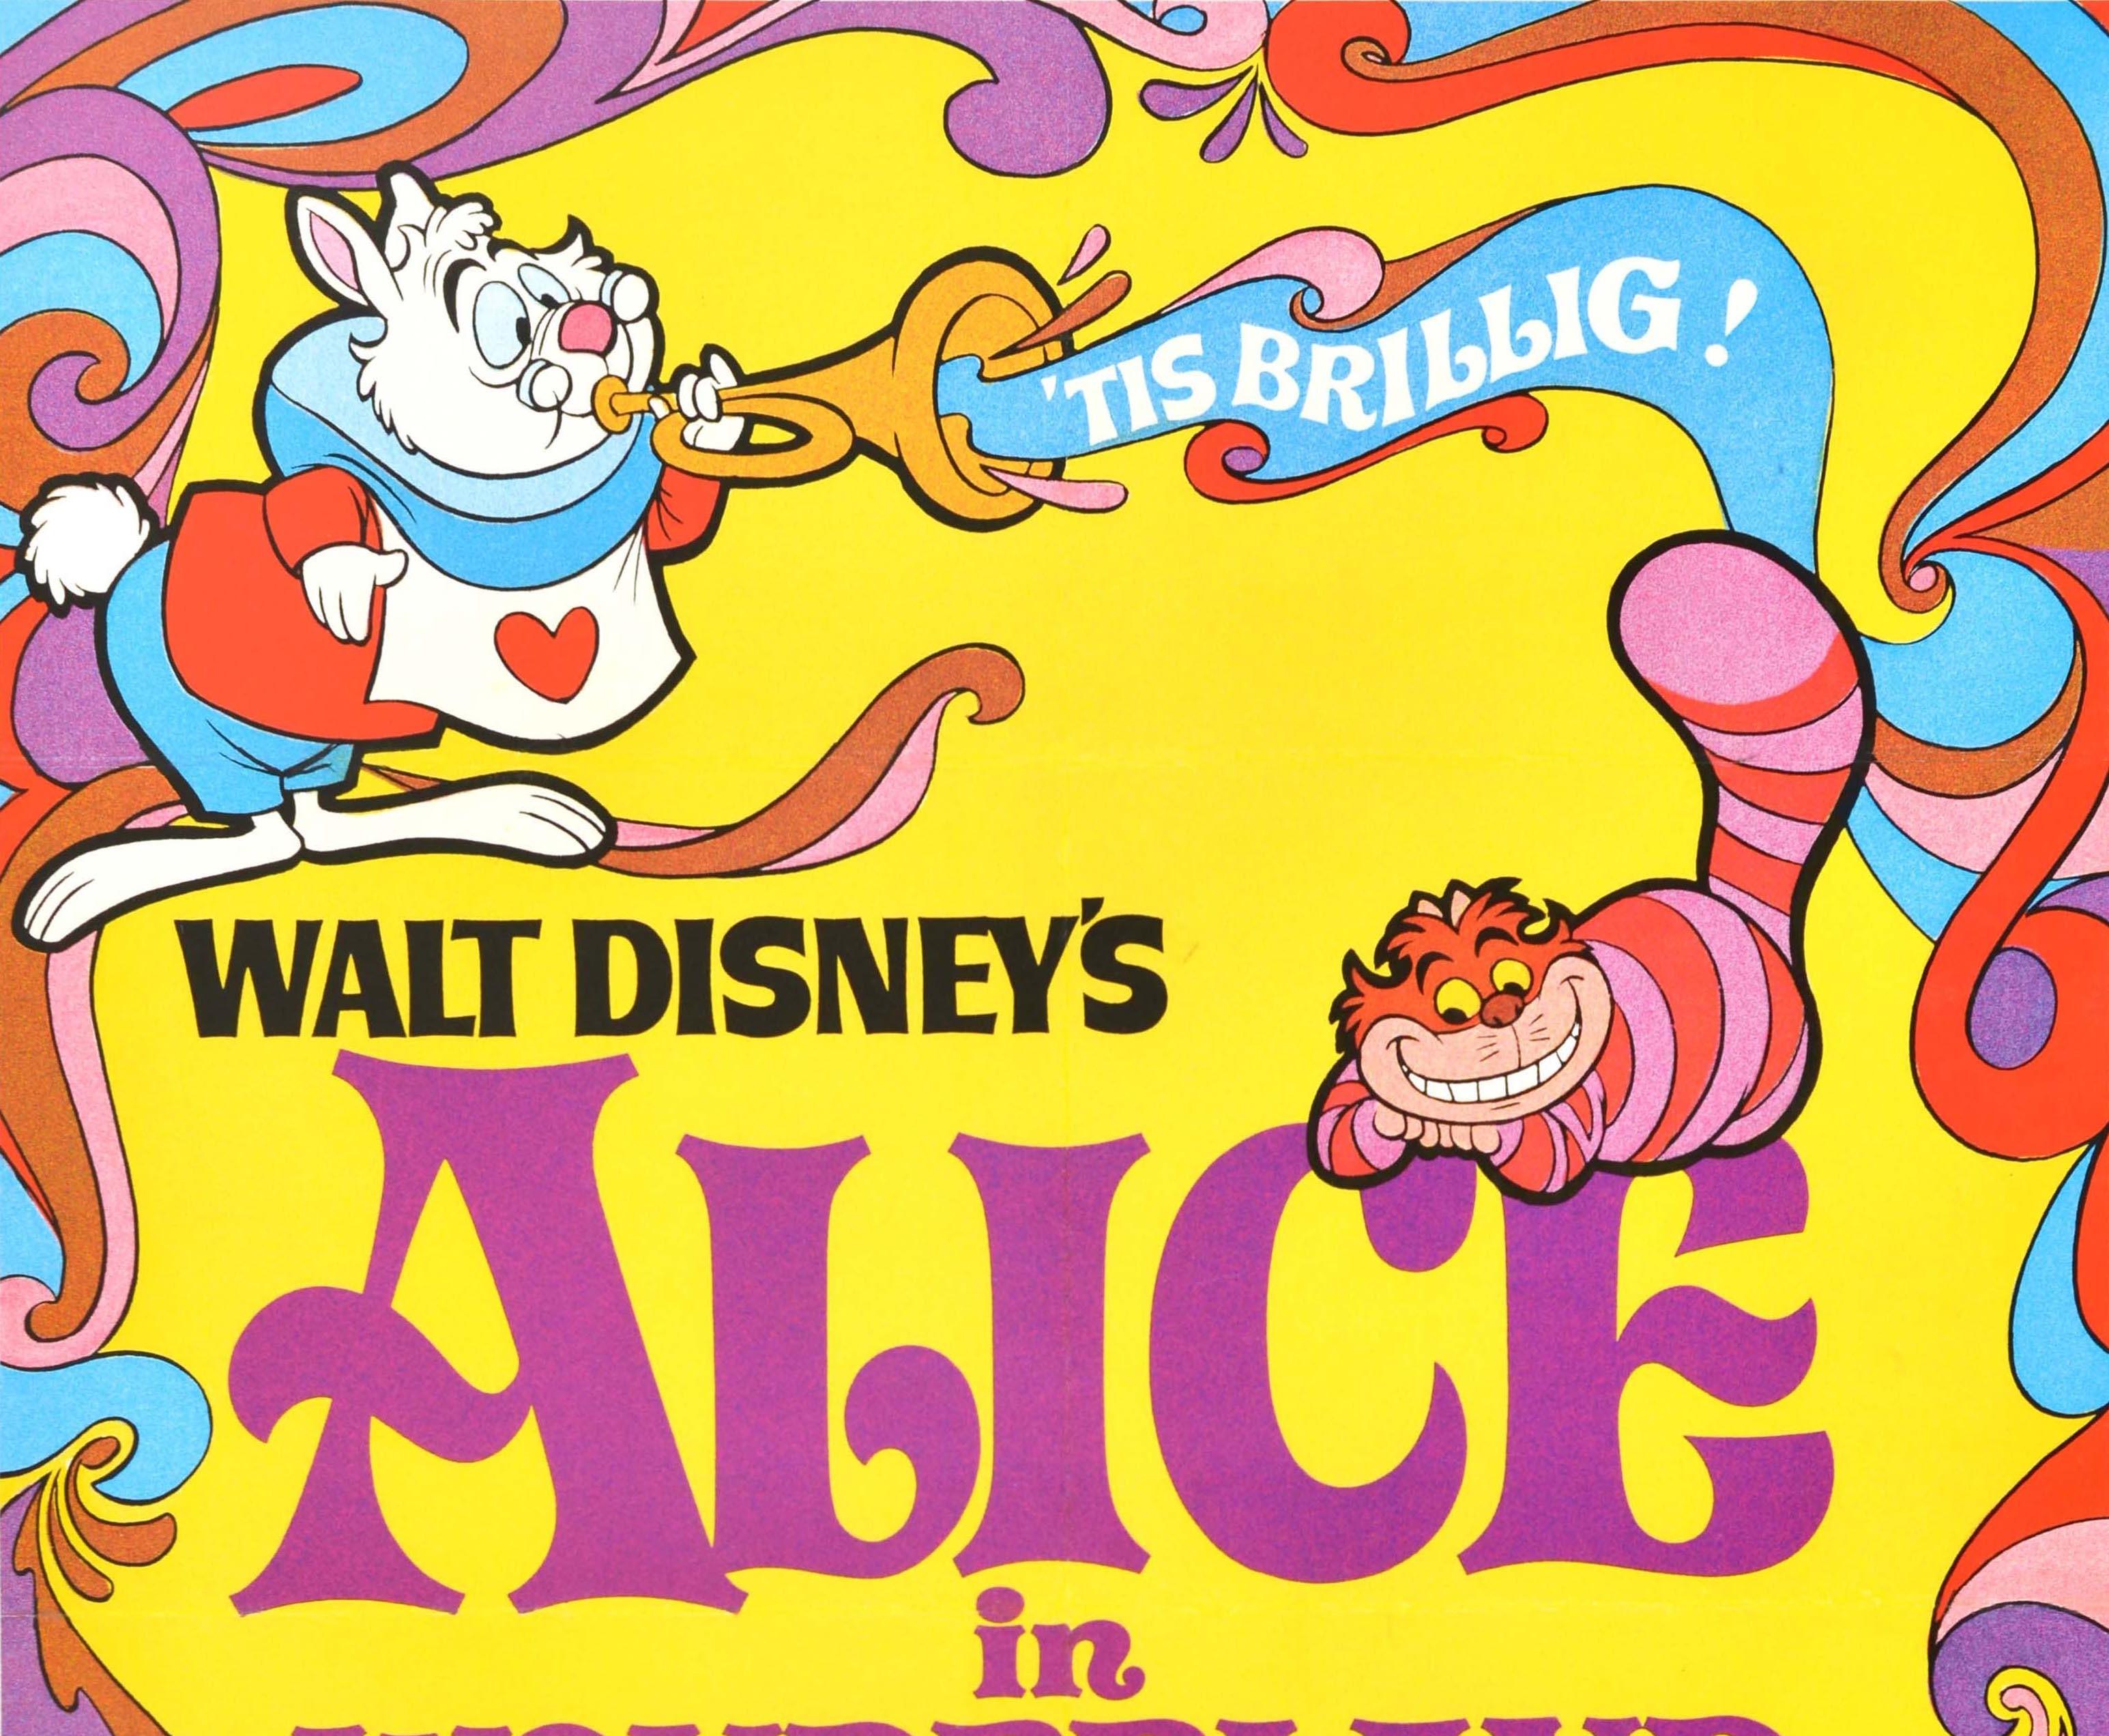 Original vintage movie poster for the 1981 re-release of the classic Walt Disney animation film Alice in Wonderland - 'Tis brillig! - first released in Technicolor by Buena Vista Distribution in 1951. Colourful and fun cartoon artwork featuring the